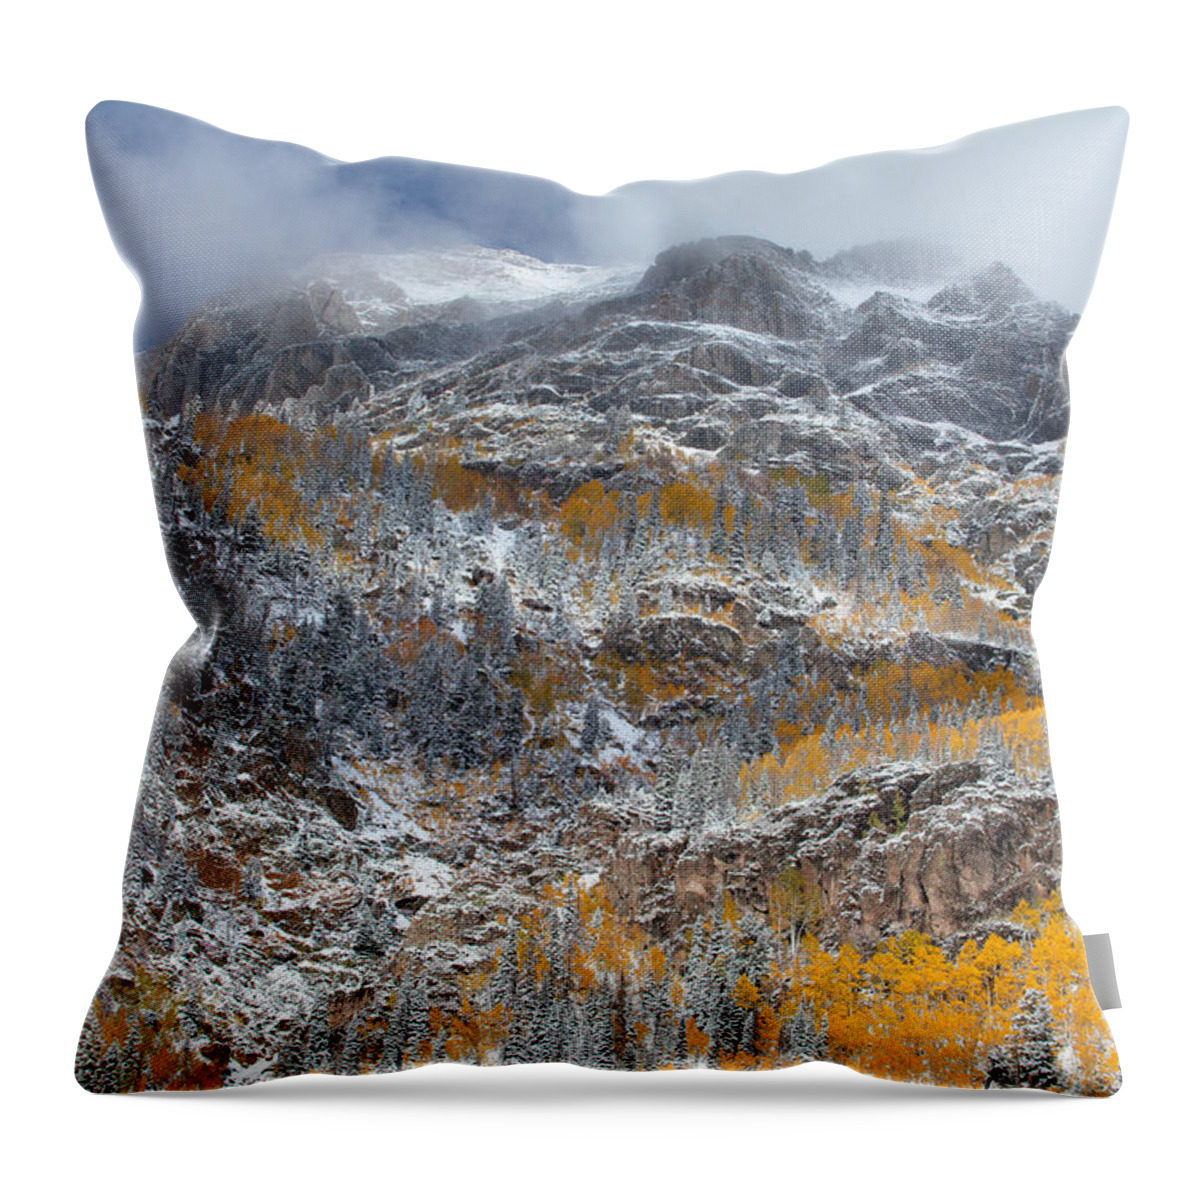 Colorado Landscapes Throw Pillow featuring the photograph Seasonal Chaos by Darren White